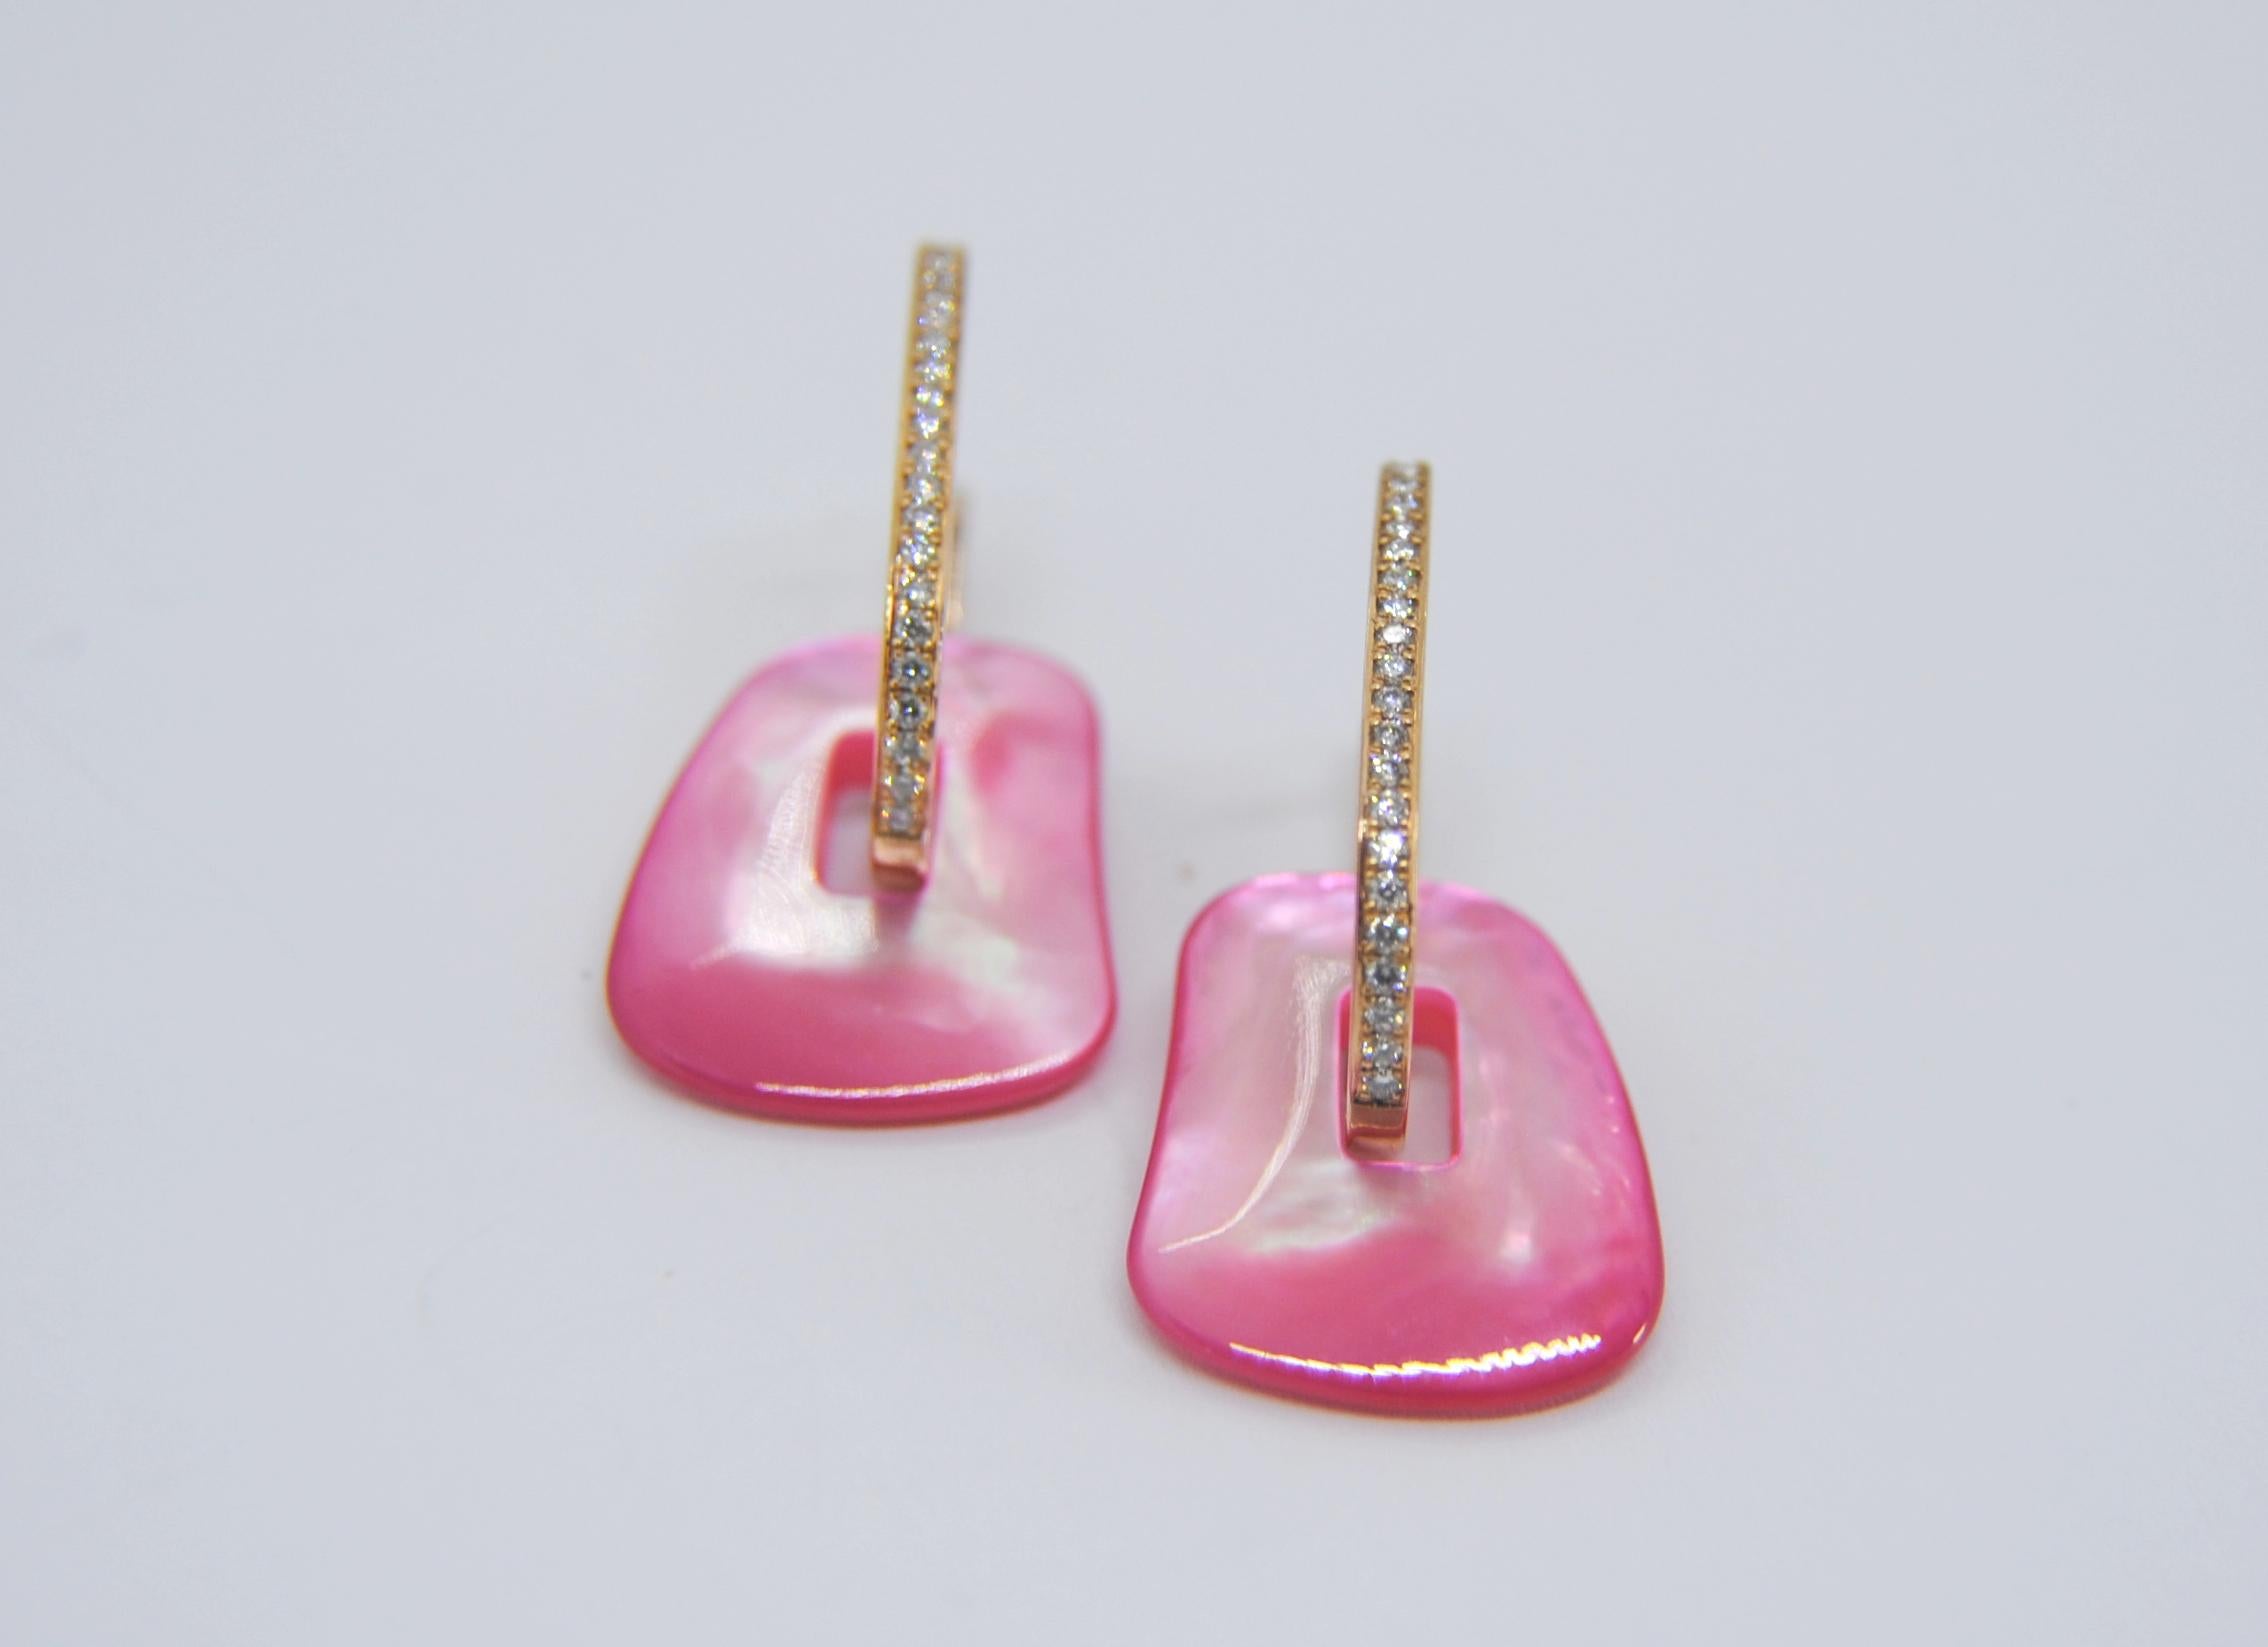 Earrings in  rose gold grams 2.6grams (also look option in white gold) Small
Measure 20mm or 0.75 inches
Diamonds carat 0.34 ct
The Mother of pearl  pieces are 19x15mm or 0.74x0.59 inches
earrings can be extended in lenght with adaptable gold